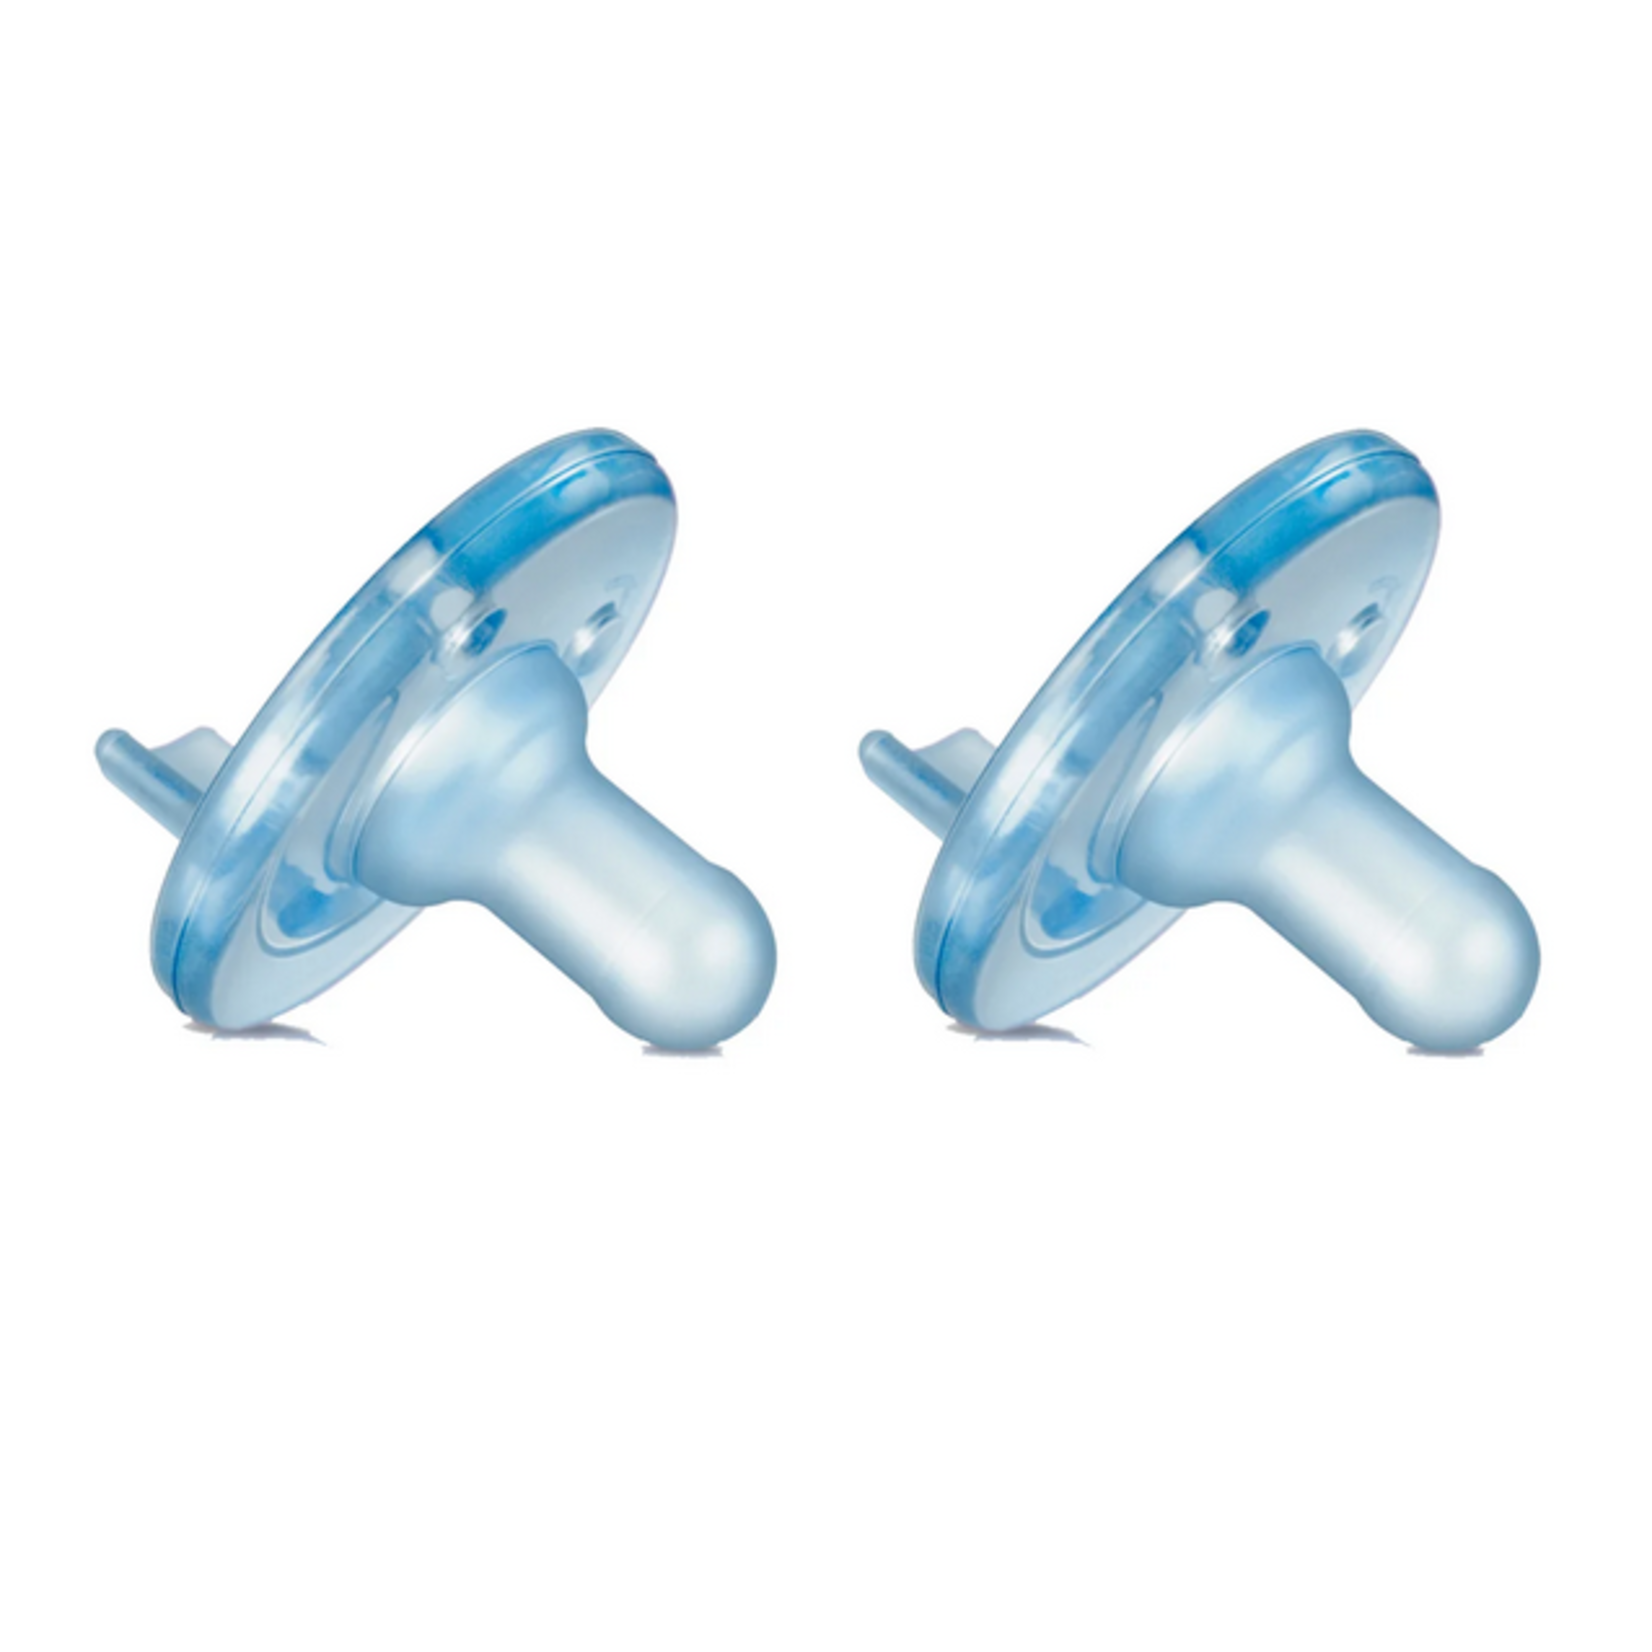 Phillips Avent AVENT SOOTHIES 0-3M